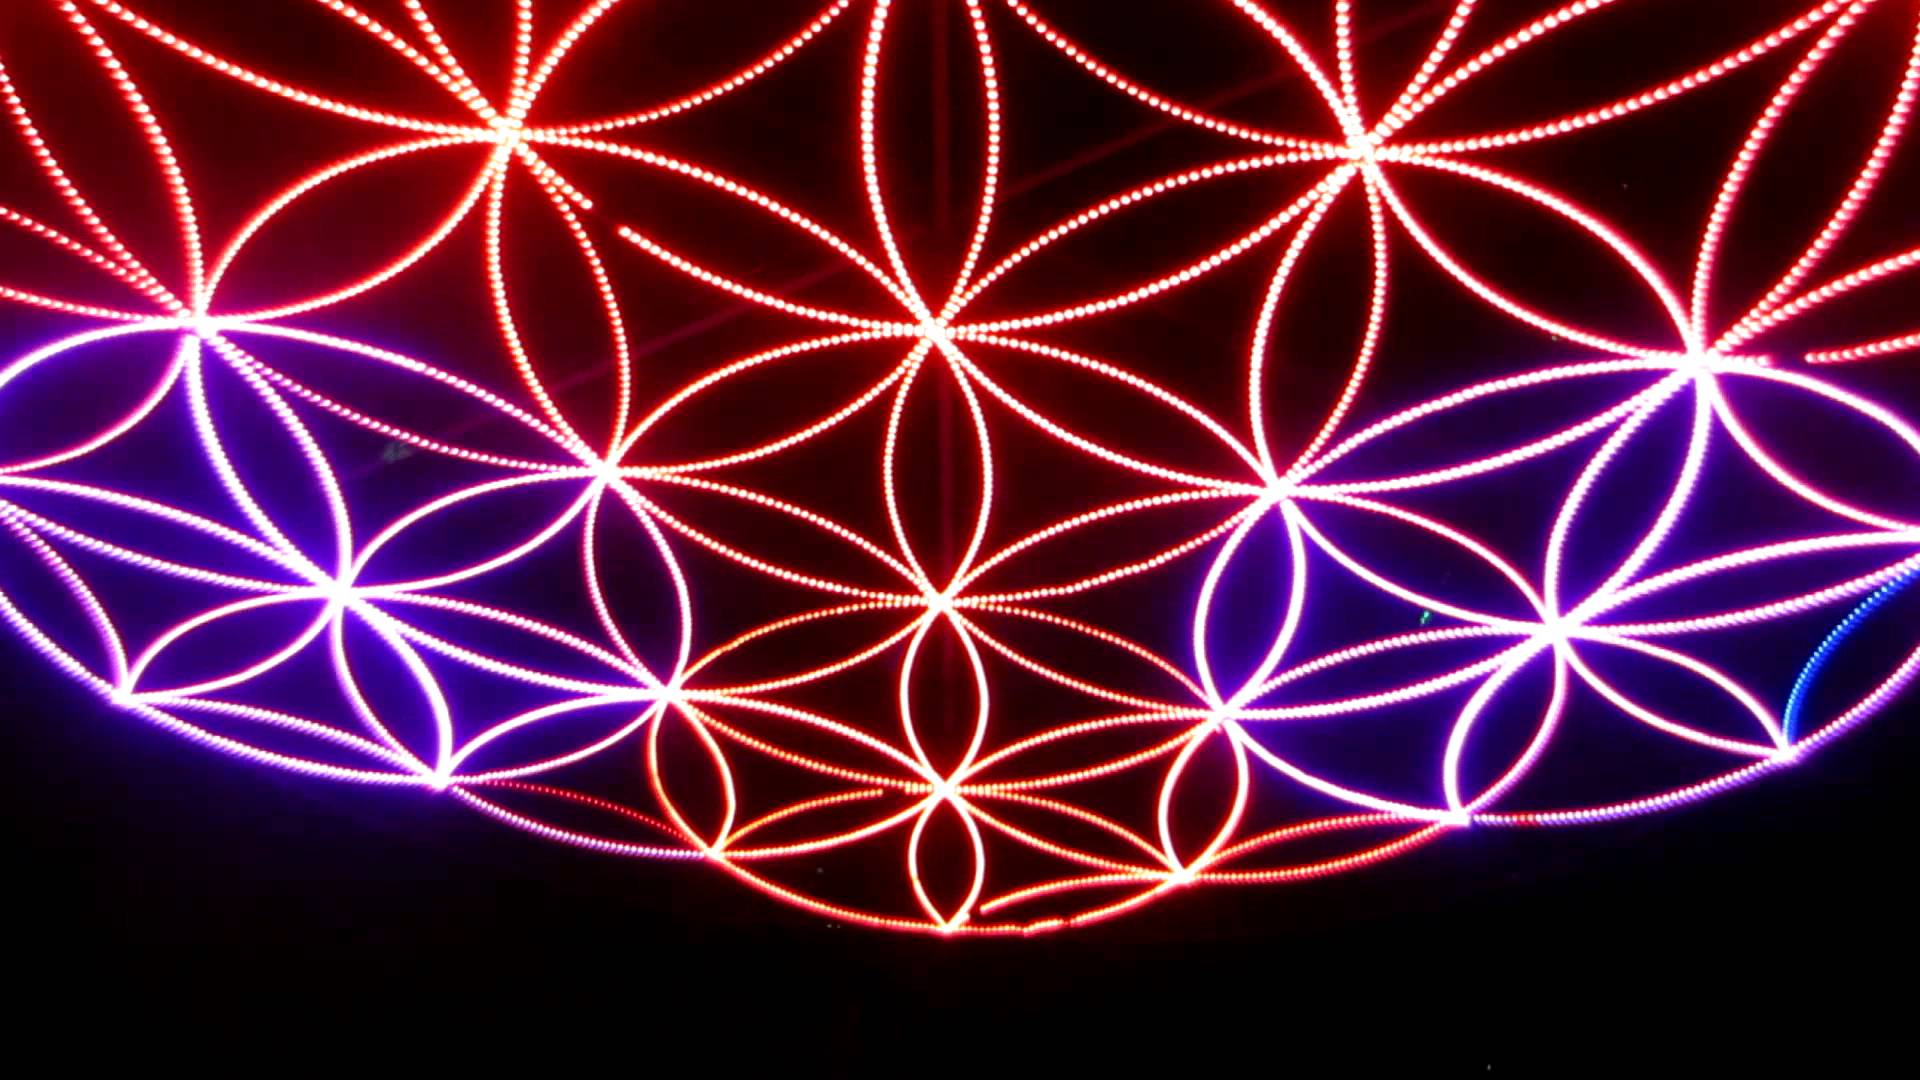 Flower of Life Art at Enchanted Forest Festival